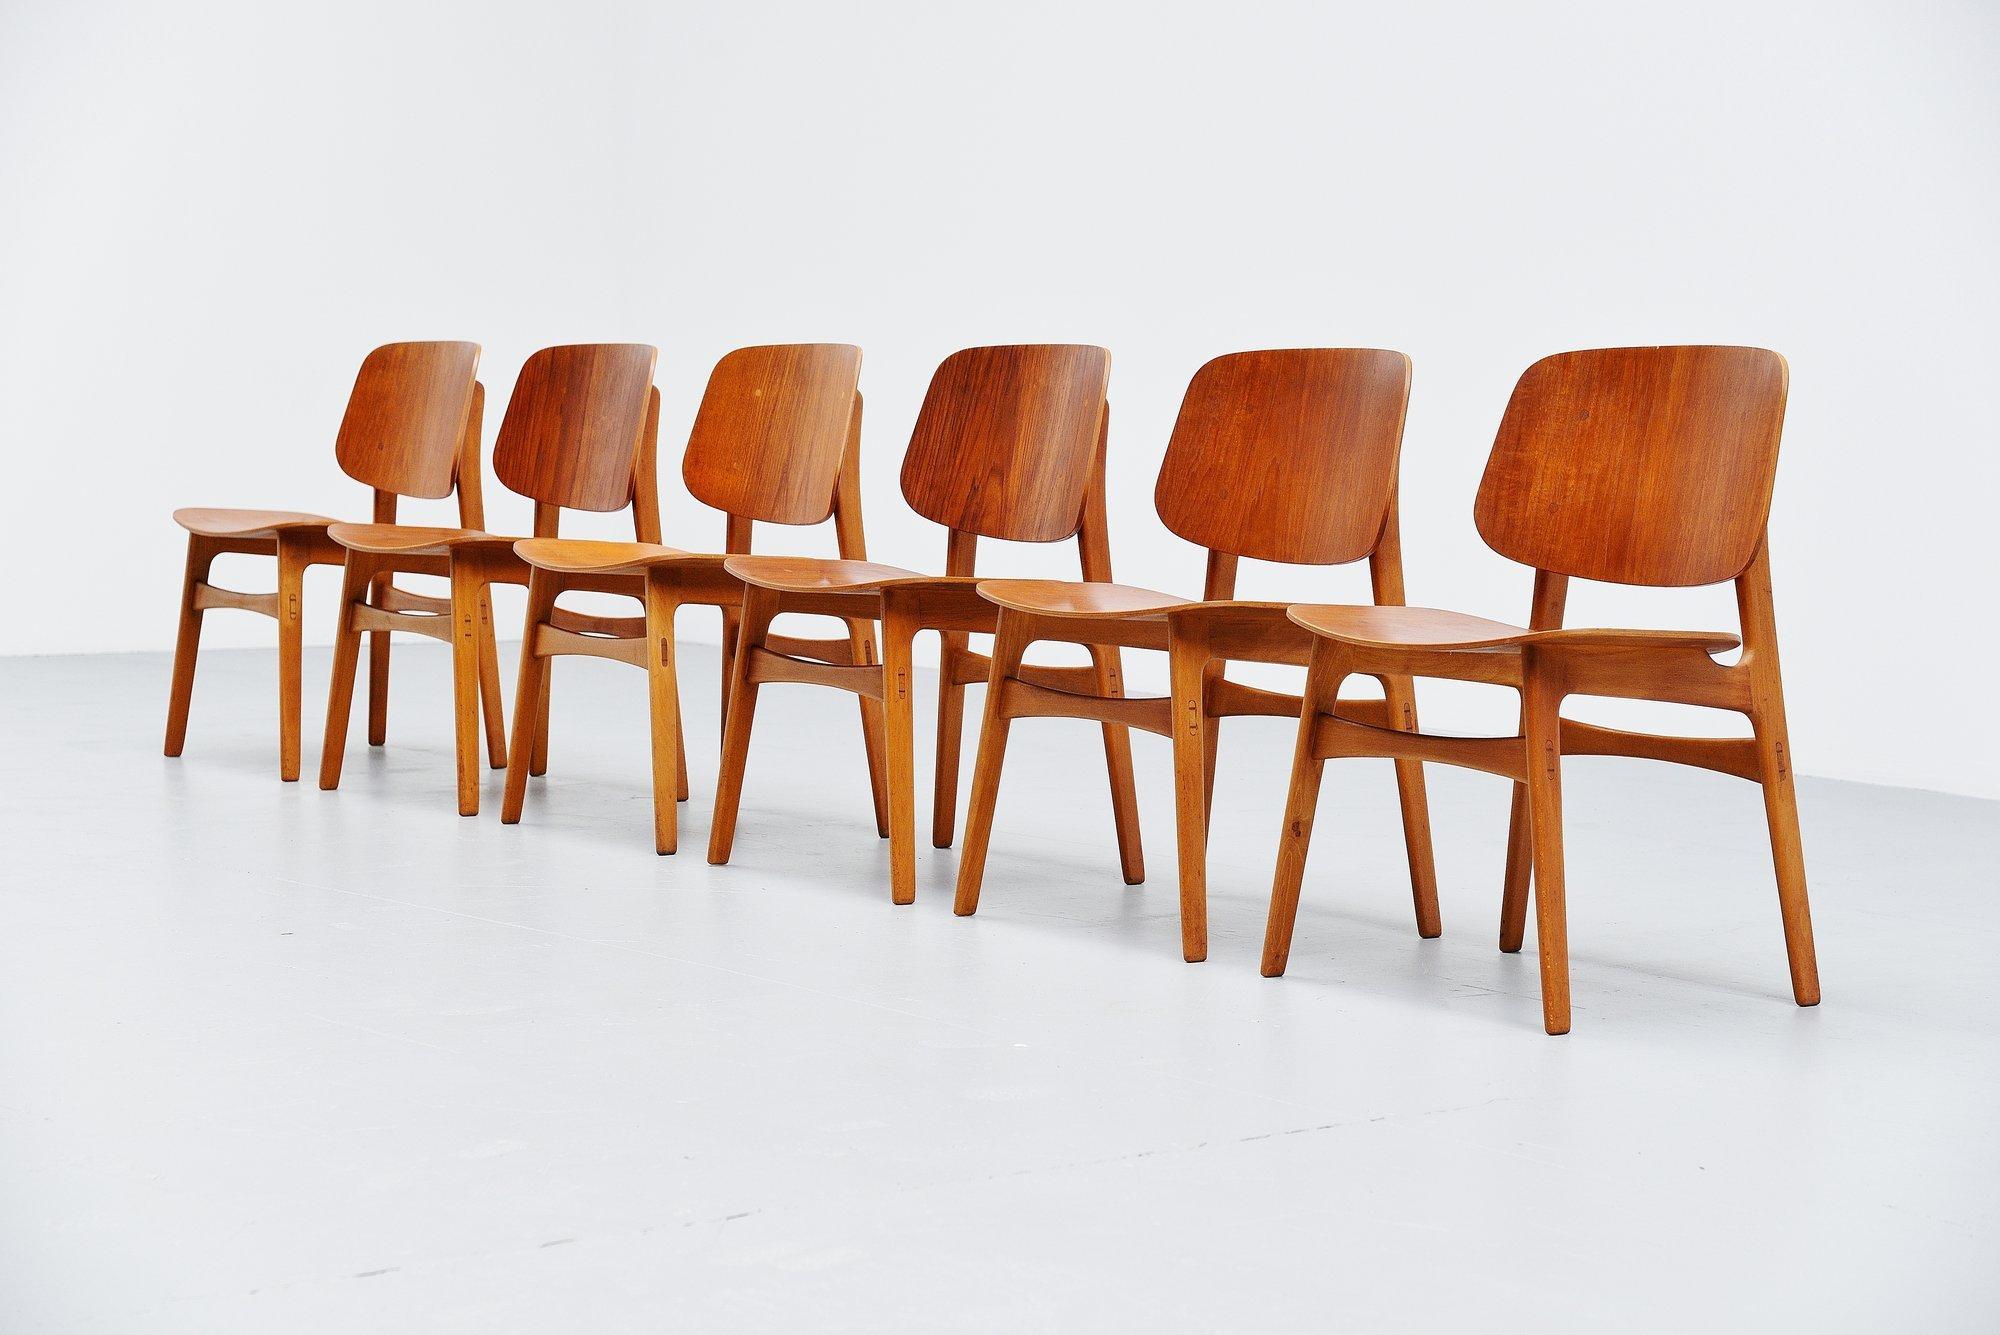 Fantastic set of 6 plywood dining chairs designed by Borge Mogensen and manufactured by Soborg Mobelfabrik, Denmark 1949. These amazing chairs are made of teak plywood seats and backs and have beech wood frames. These chairs are beautifully